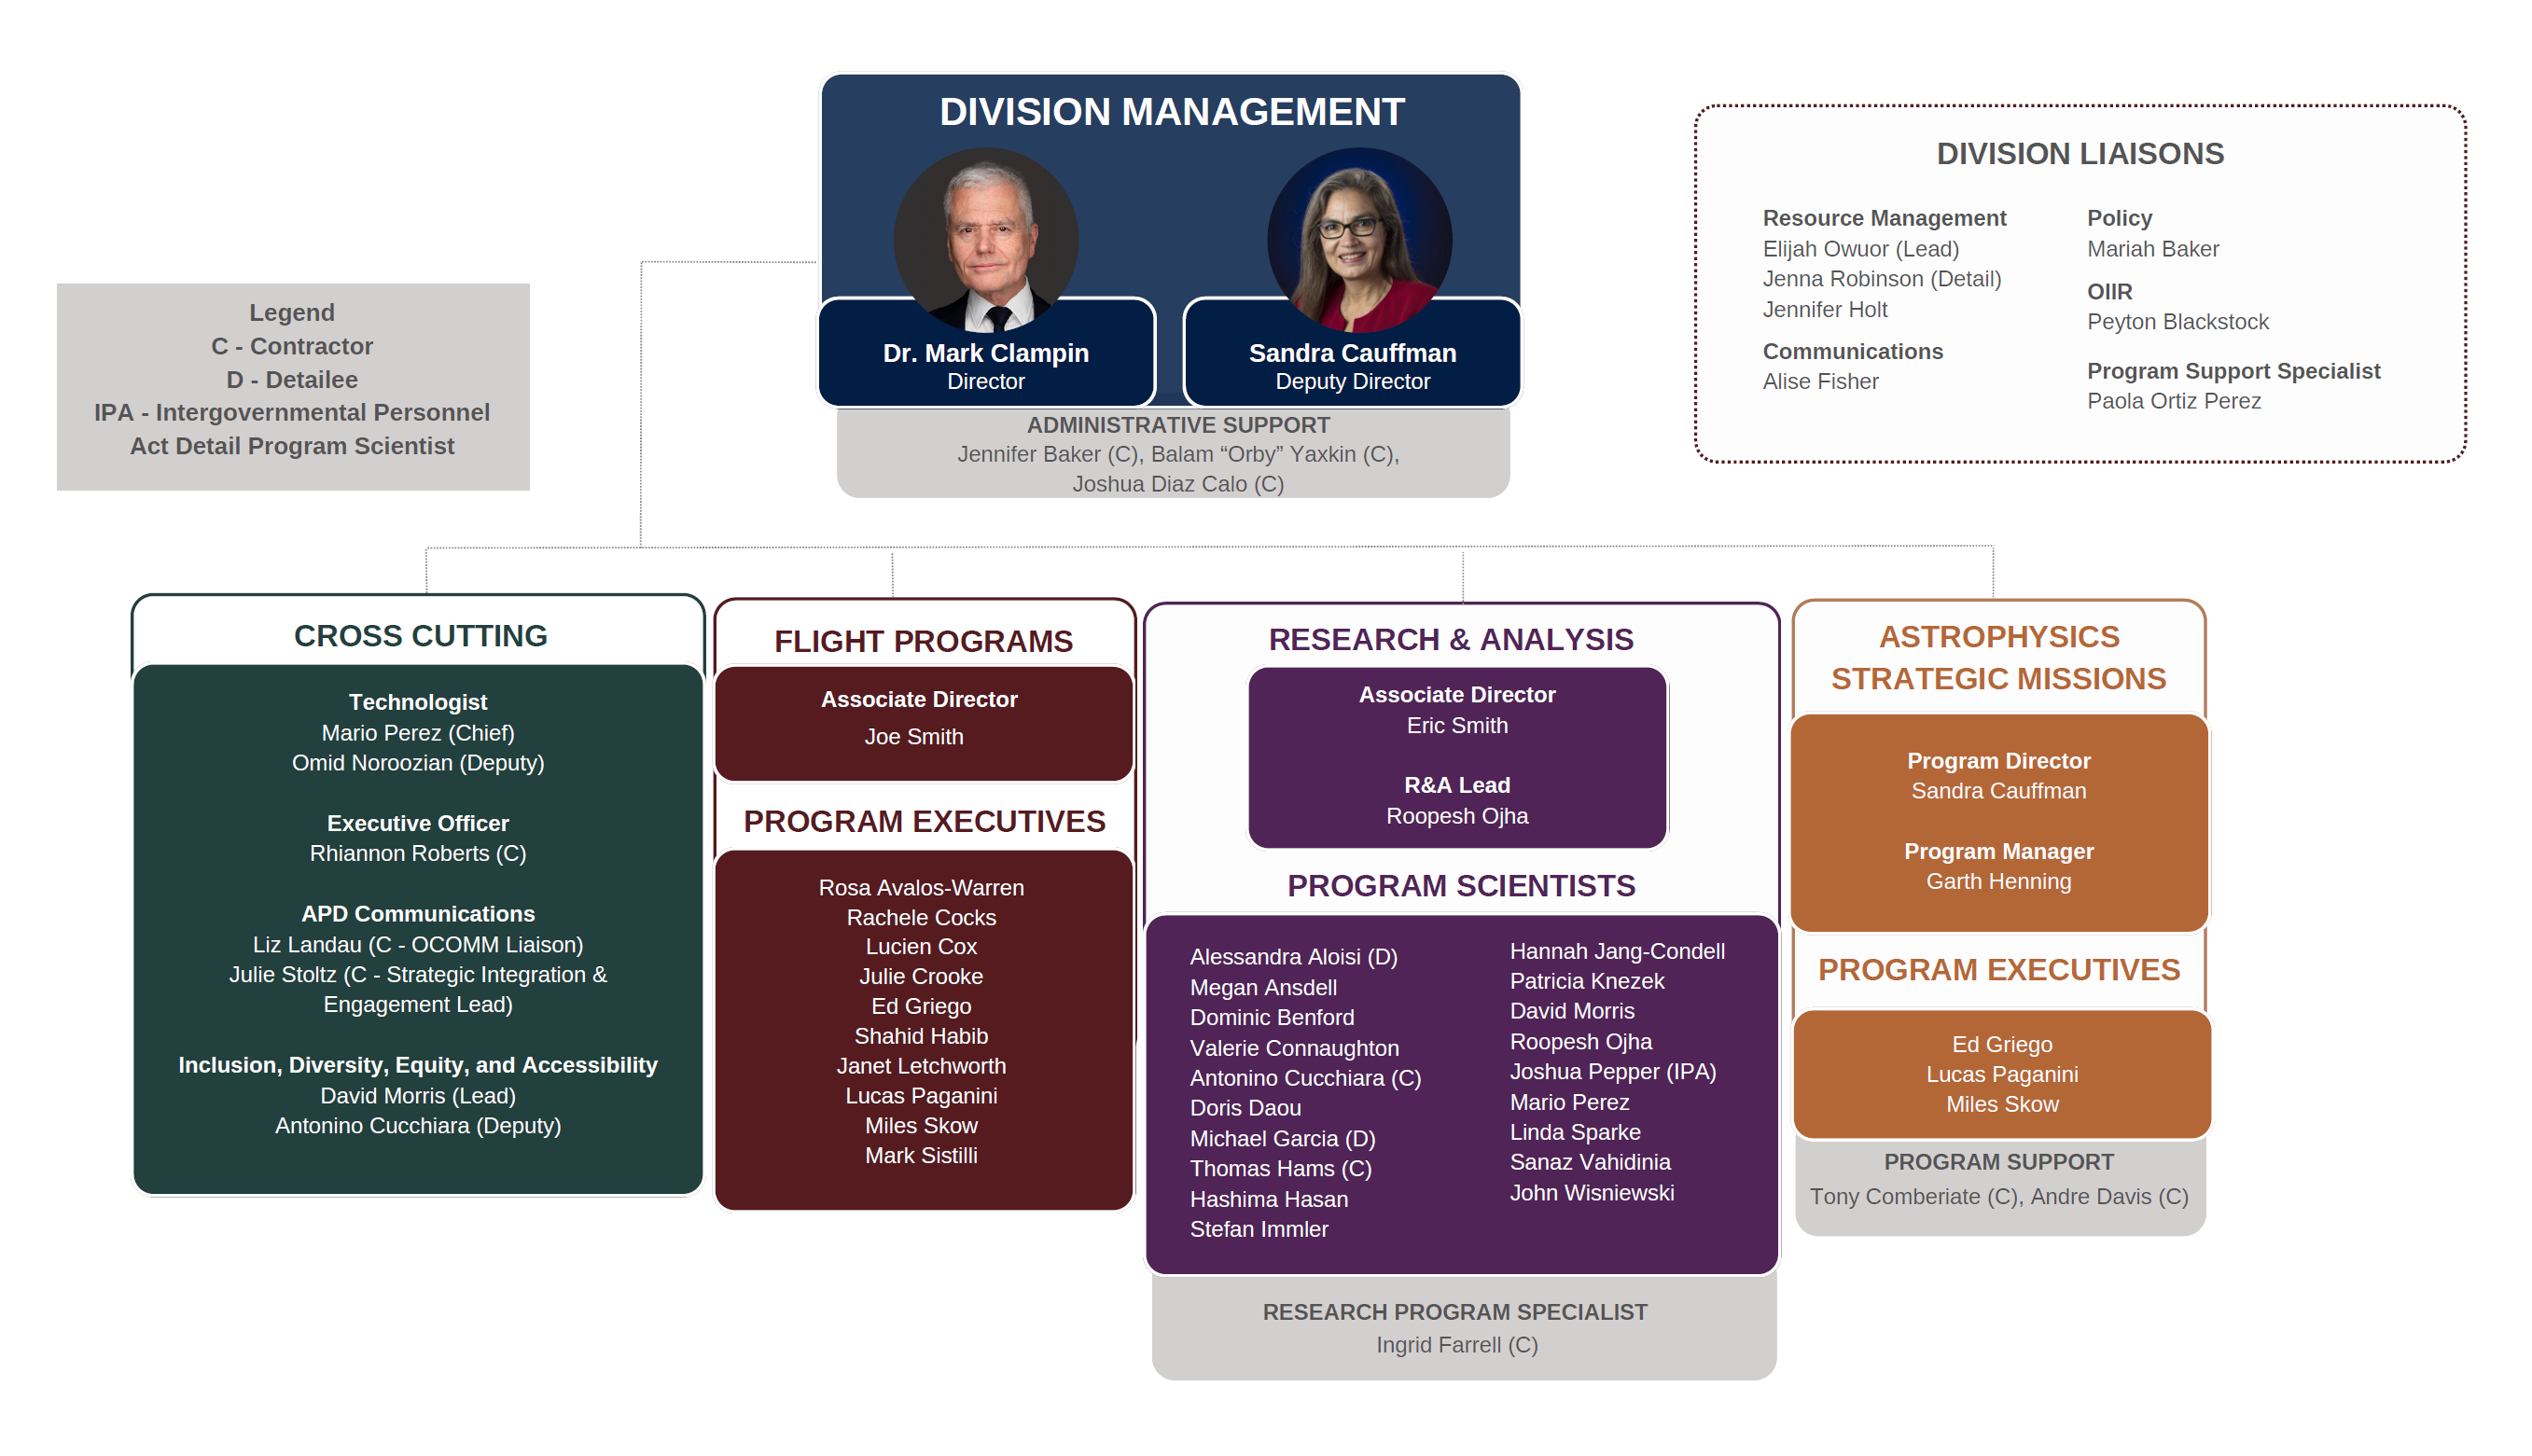 Org chart of the astrophysics division leadership.